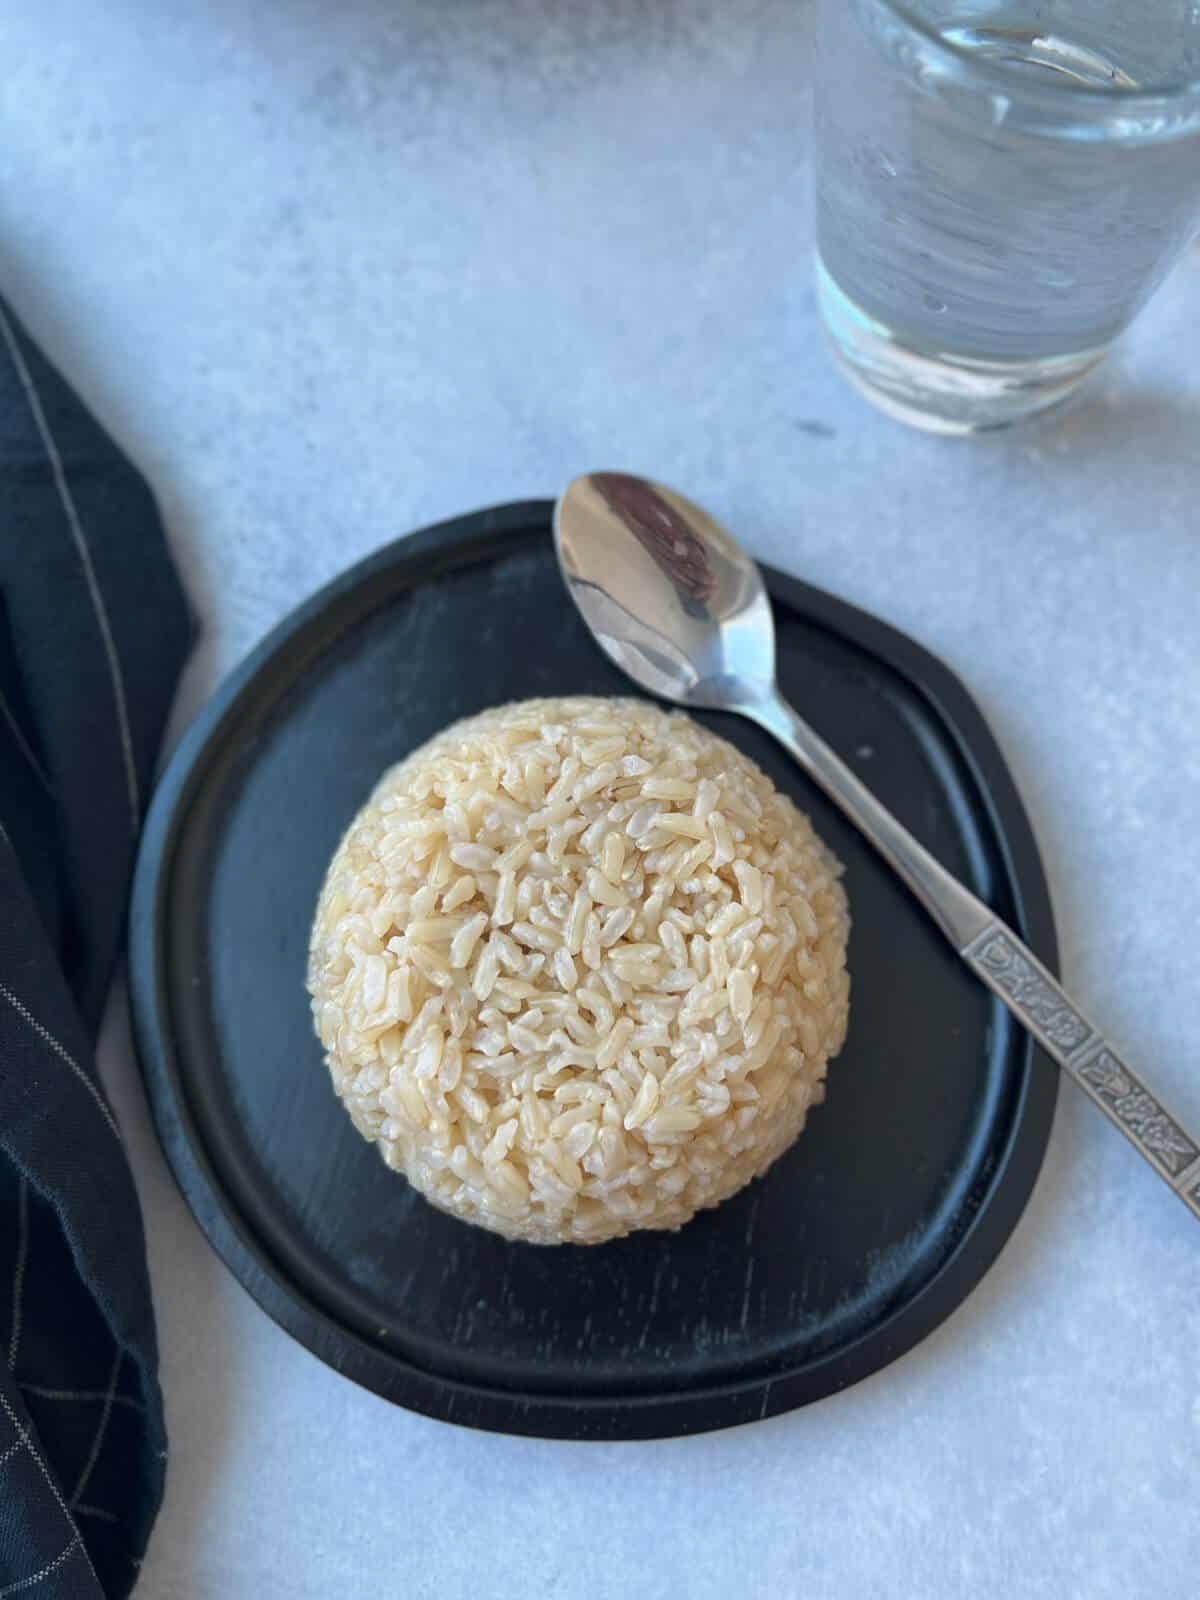 A plate with a mound of basmati brown rice on it.